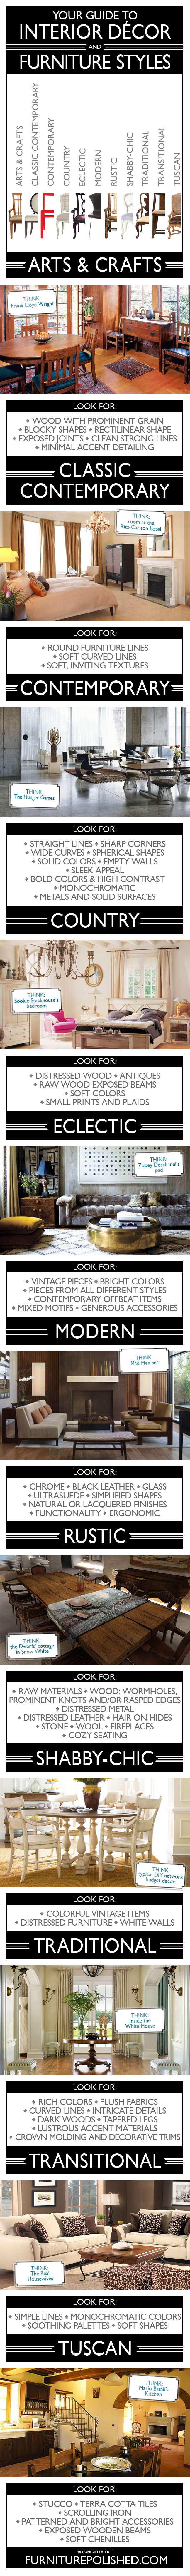 Interior Décor and Furniture Styles – Explained infographic